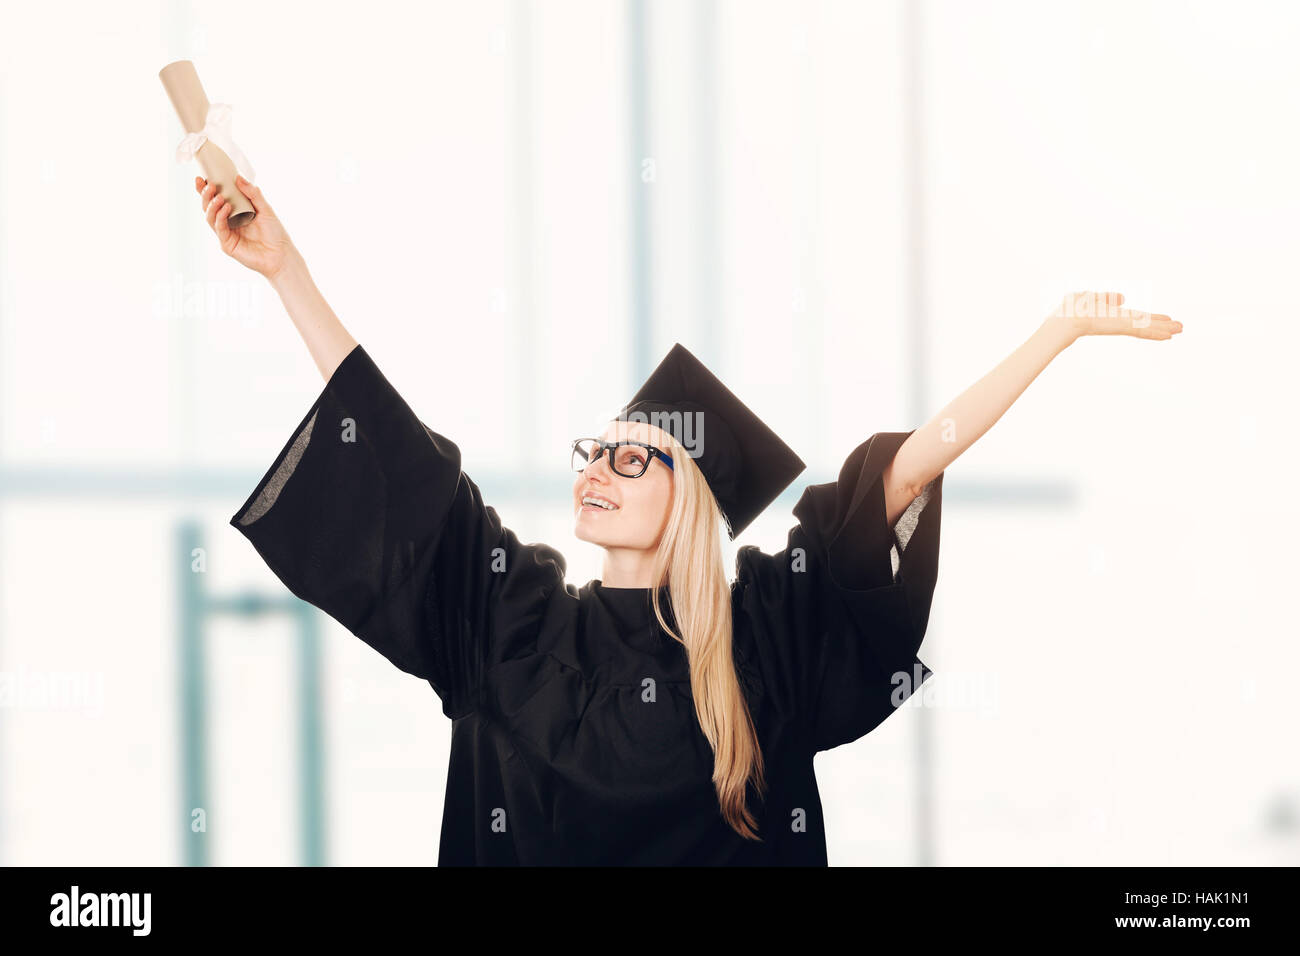 happy university graduate wearing cap and gown and holding diploma in hand Stock Photo